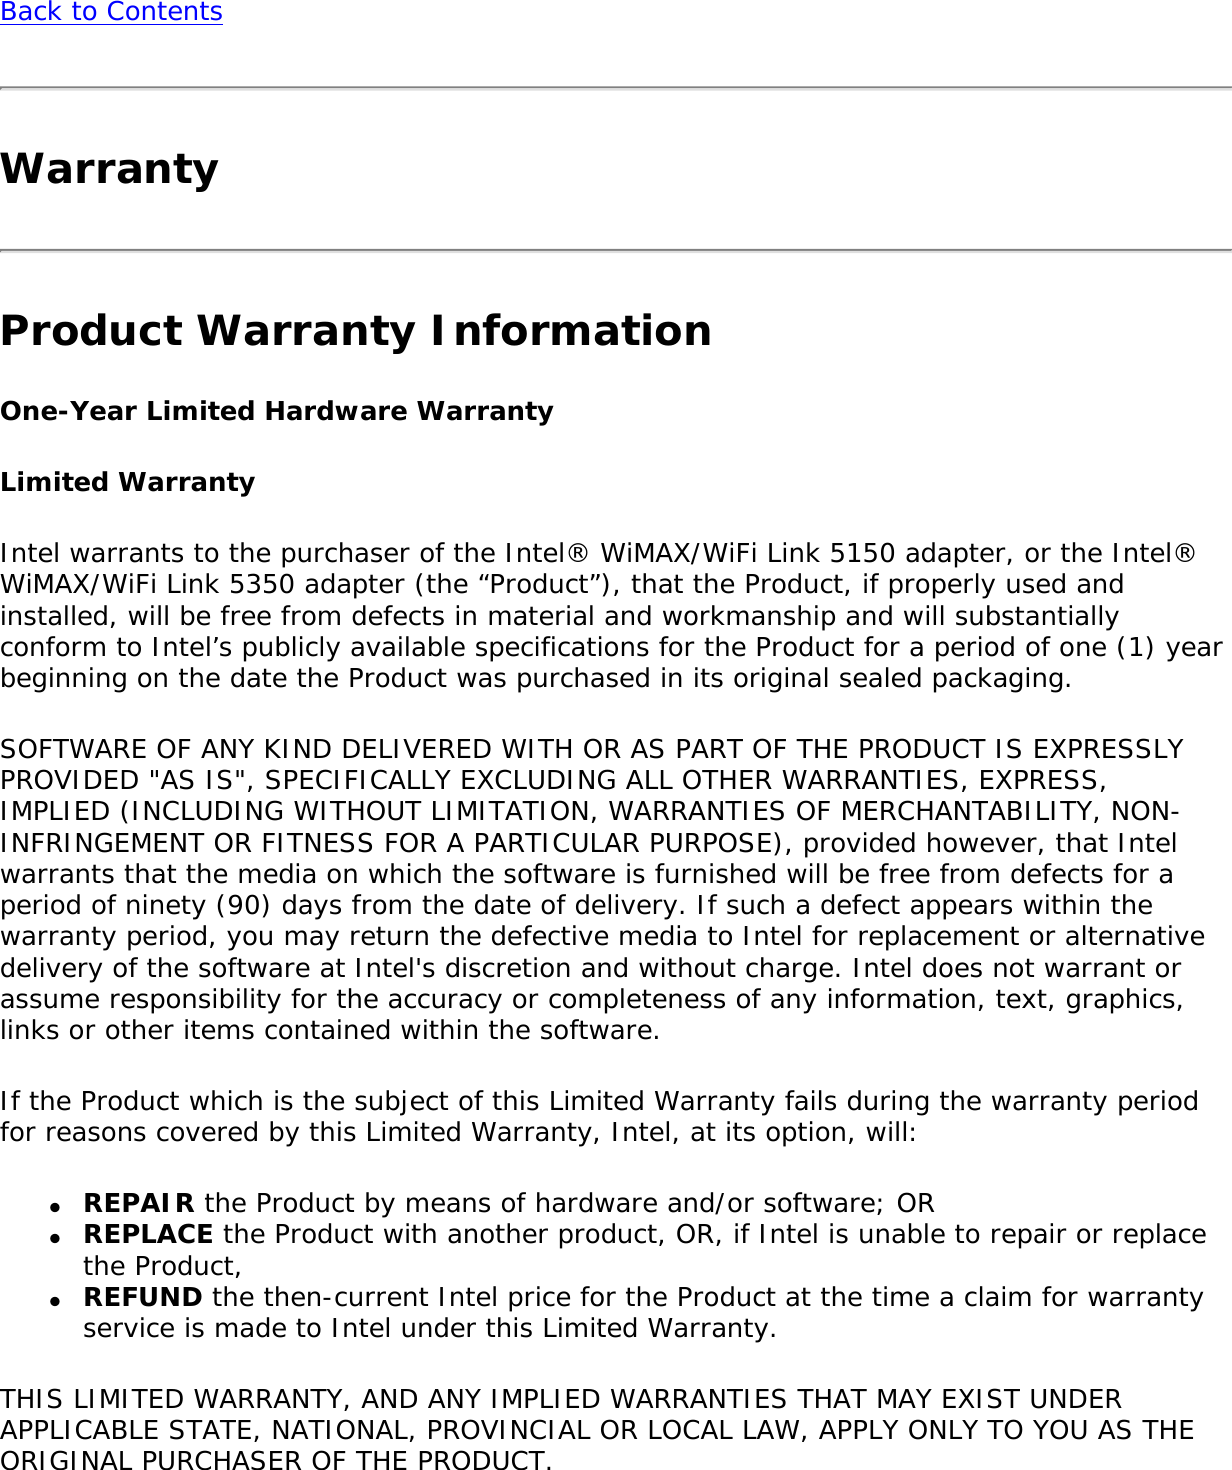 Back to ContentsWarrantyProduct Warranty InformationOne-Year Limited Hardware WarrantyLimited WarrantyIntel warrants to the purchaser of the Intel® WiMAX/WiFi Link 5150 adapter, or the Intel® WiMAX/WiFi Link 5350 adapter (the “Product”), that the Product, if properly used and installed, will be free from defects in material and workmanship and will substantially conform to Intel’s publicly available specifications for the Product for a period of one (1) year beginning on the date the Product was purchased in its original sealed packaging.SOFTWARE OF ANY KIND DELIVERED WITH OR AS PART OF THE PRODUCT IS EXPRESSLY PROVIDED &quot;AS IS&quot;, SPECIFICALLY EXCLUDING ALL OTHER WARRANTIES, EXPRESS, IMPLIED (INCLUDING WITHOUT LIMITATION, WARRANTIES OF MERCHANTABILITY, NON-INFRINGEMENT OR FITNESS FOR A PARTICULAR PURPOSE), provided however, that Intel warrants that the media on which the software is furnished will be free from defects for a period of ninety (90) days from the date of delivery. If such a defect appears within the warranty period, you may return the defective media to Intel for replacement or alternative delivery of the software at Intel&apos;s discretion and without charge. Intel does not warrant or assume responsibility for the accuracy or completeness of any information, text, graphics, links or other items contained within the software.If the Product which is the subject of this Limited Warranty fails during the warranty period for reasons covered by this Limited Warranty, Intel, at its option, will:●     REPAIR the Product by means of hardware and/or software; OR●     REPLACE the Product with another product, OR, if Intel is unable to repair or replace the Product,●     REFUND the then-current Intel price for the Product at the time a claim for warranty service is made to Intel under this Limited Warranty.THIS LIMITED WARRANTY, AND ANY IMPLIED WARRANTIES THAT MAY EXIST UNDER APPLICABLE STATE, NATIONAL, PROVINCIAL OR LOCAL LAW, APPLY ONLY TO YOU AS THE ORIGINAL PURCHASER OF THE PRODUCT.